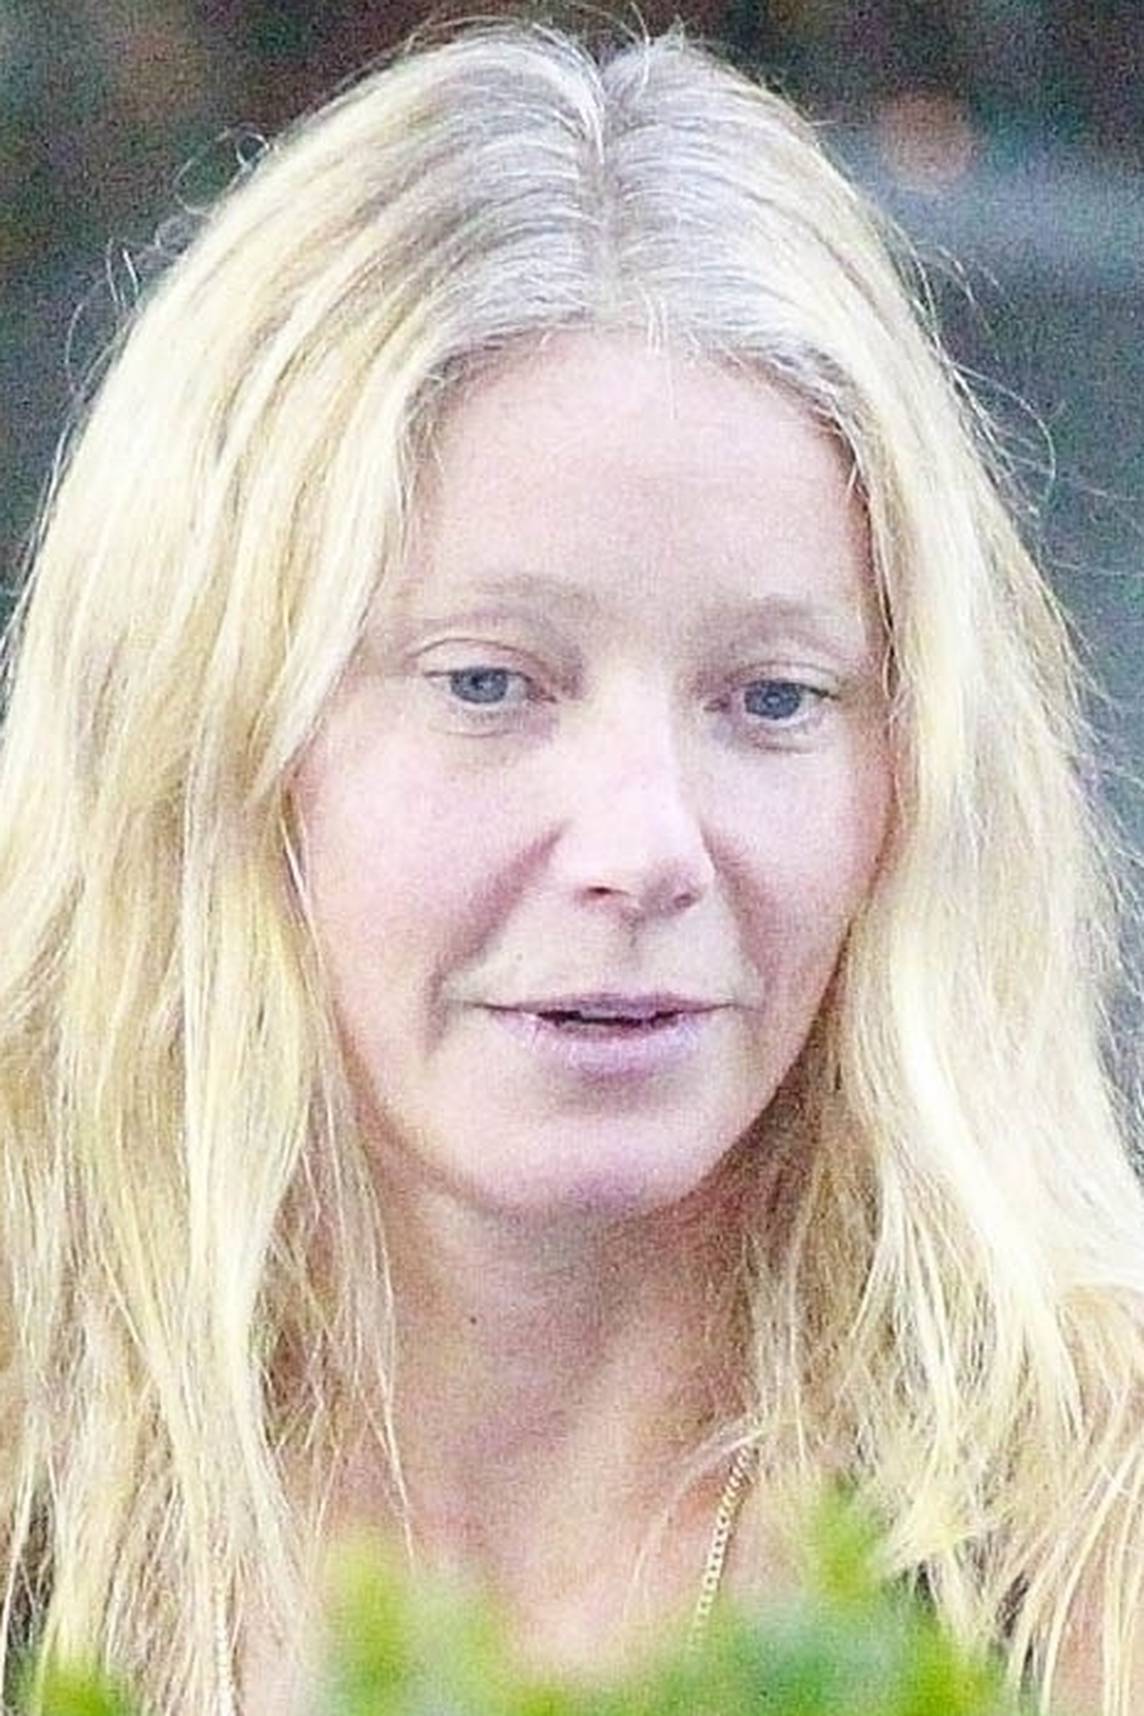 *EXCLUSIVE* Gwyneth Paltrow shows off grey roots and goes makeup free for Sunday dinner with family and friends at Mr. Chow